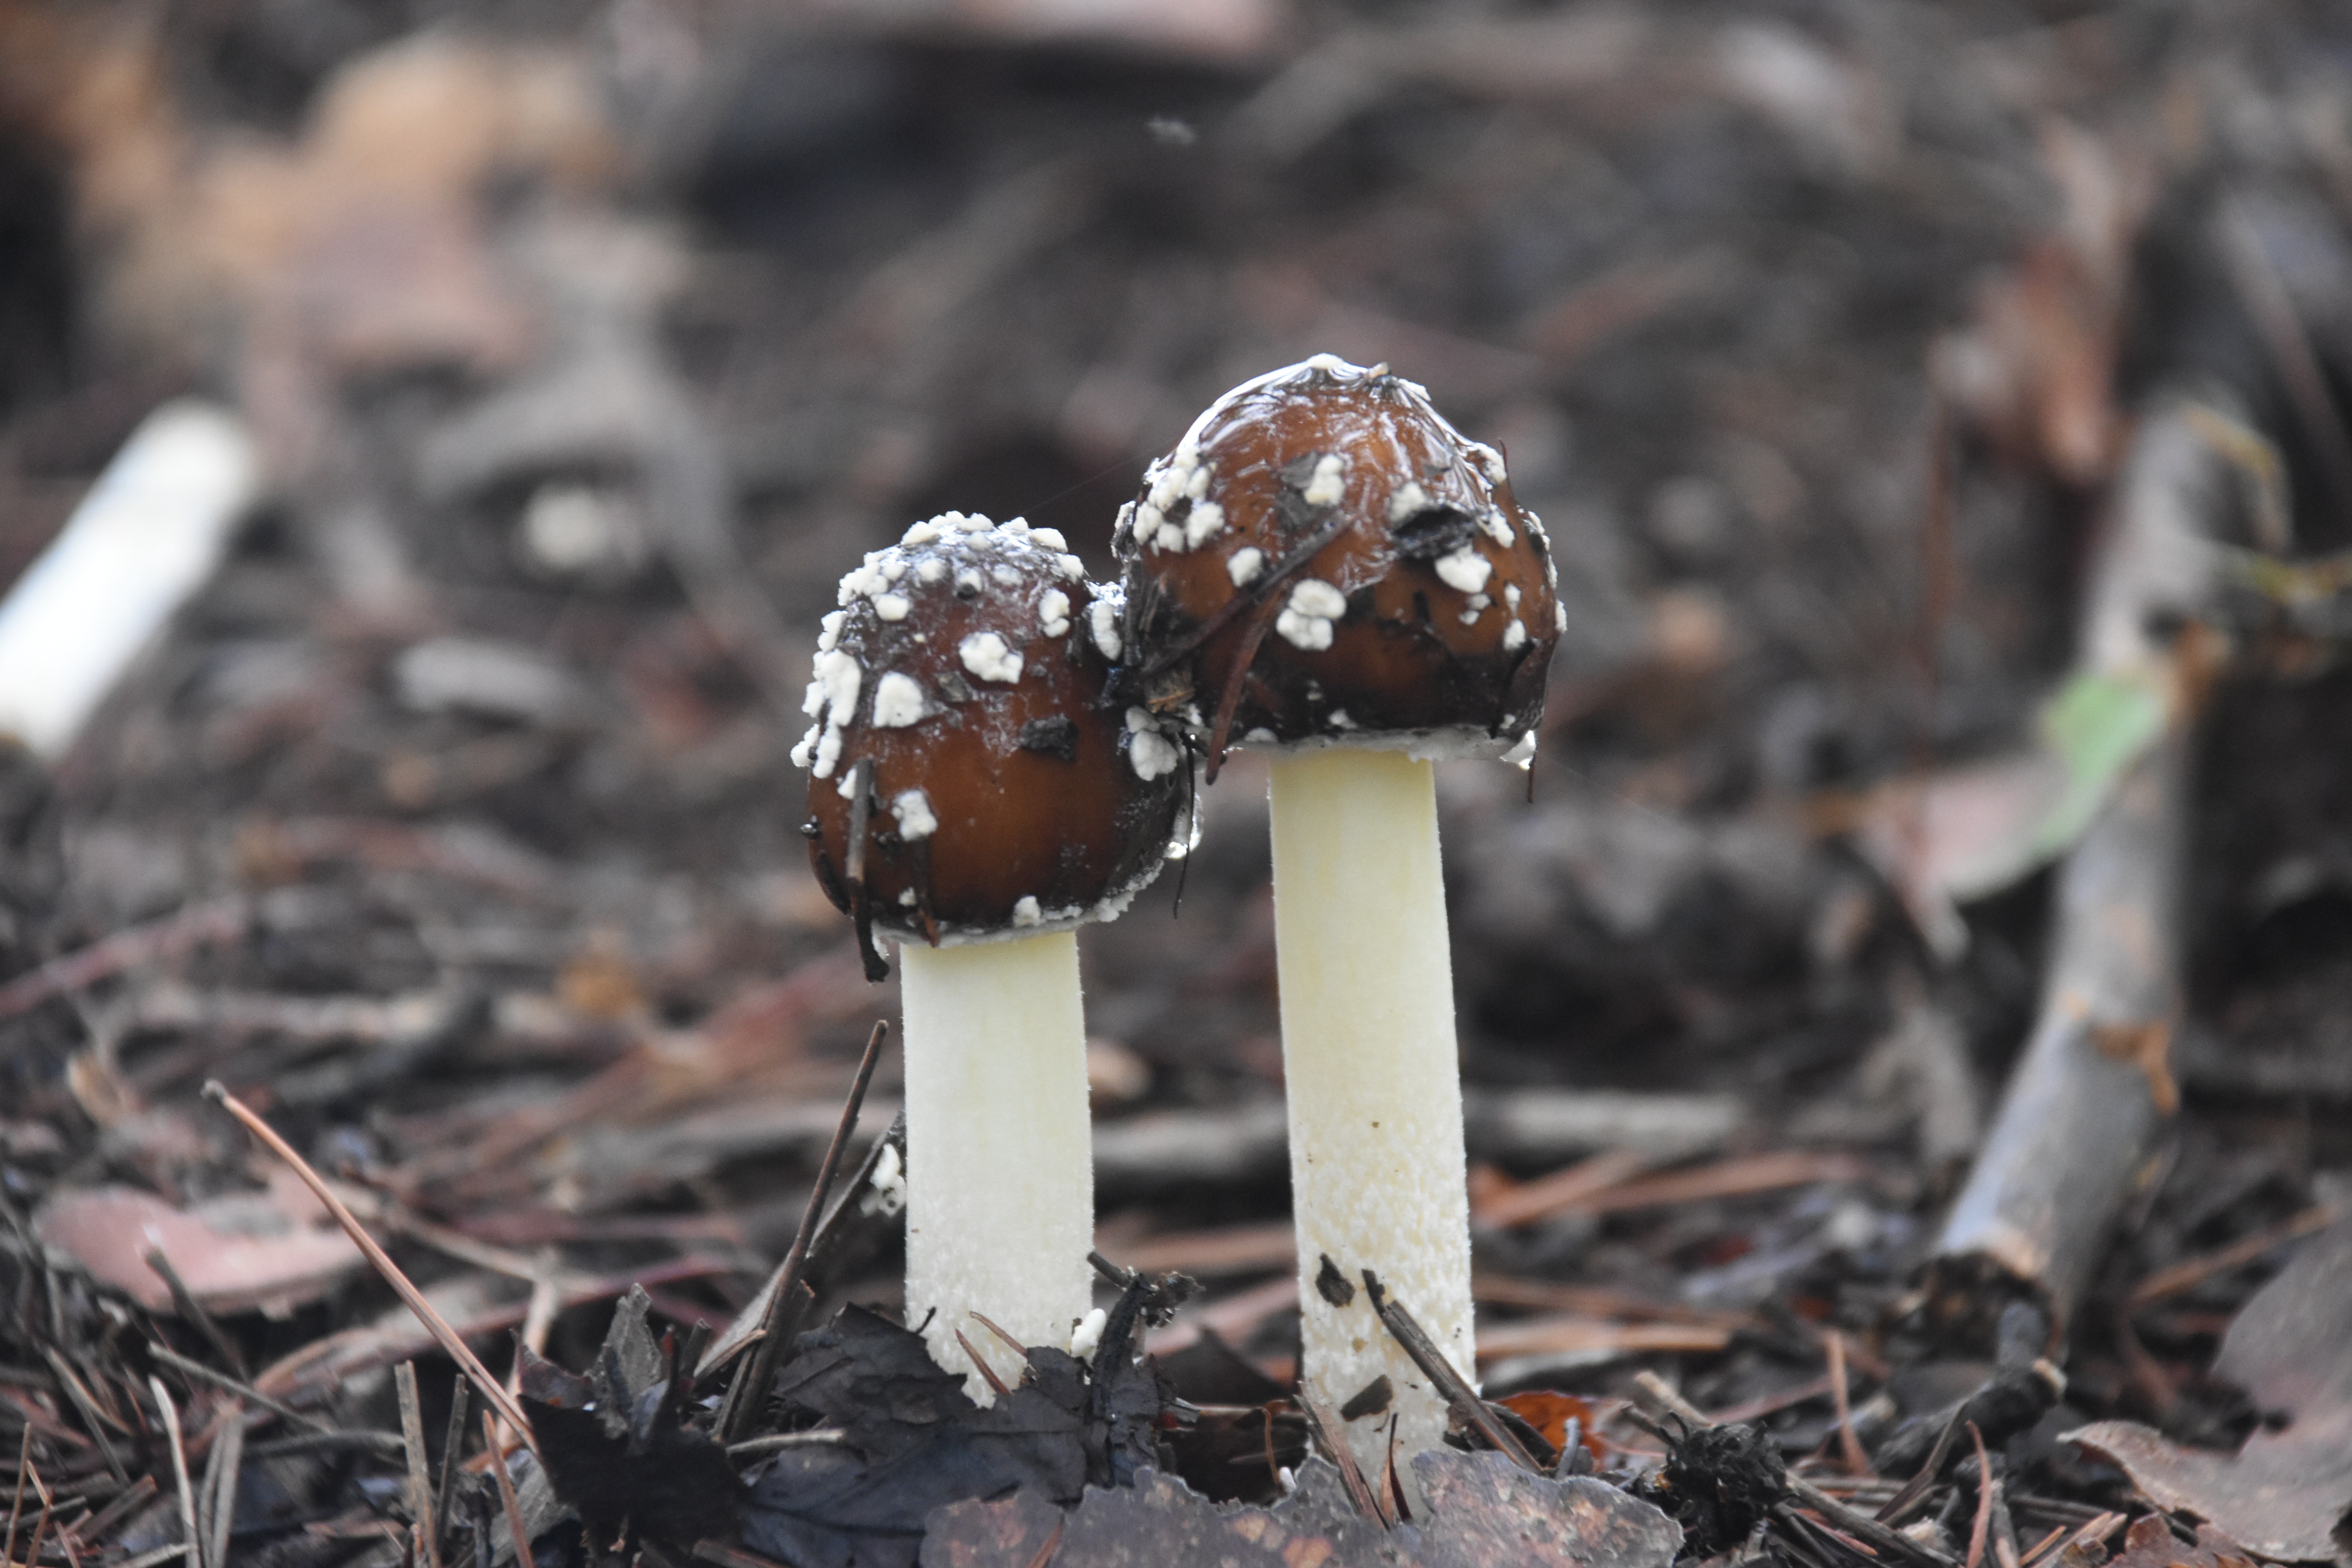 2 brown and white mushrooms